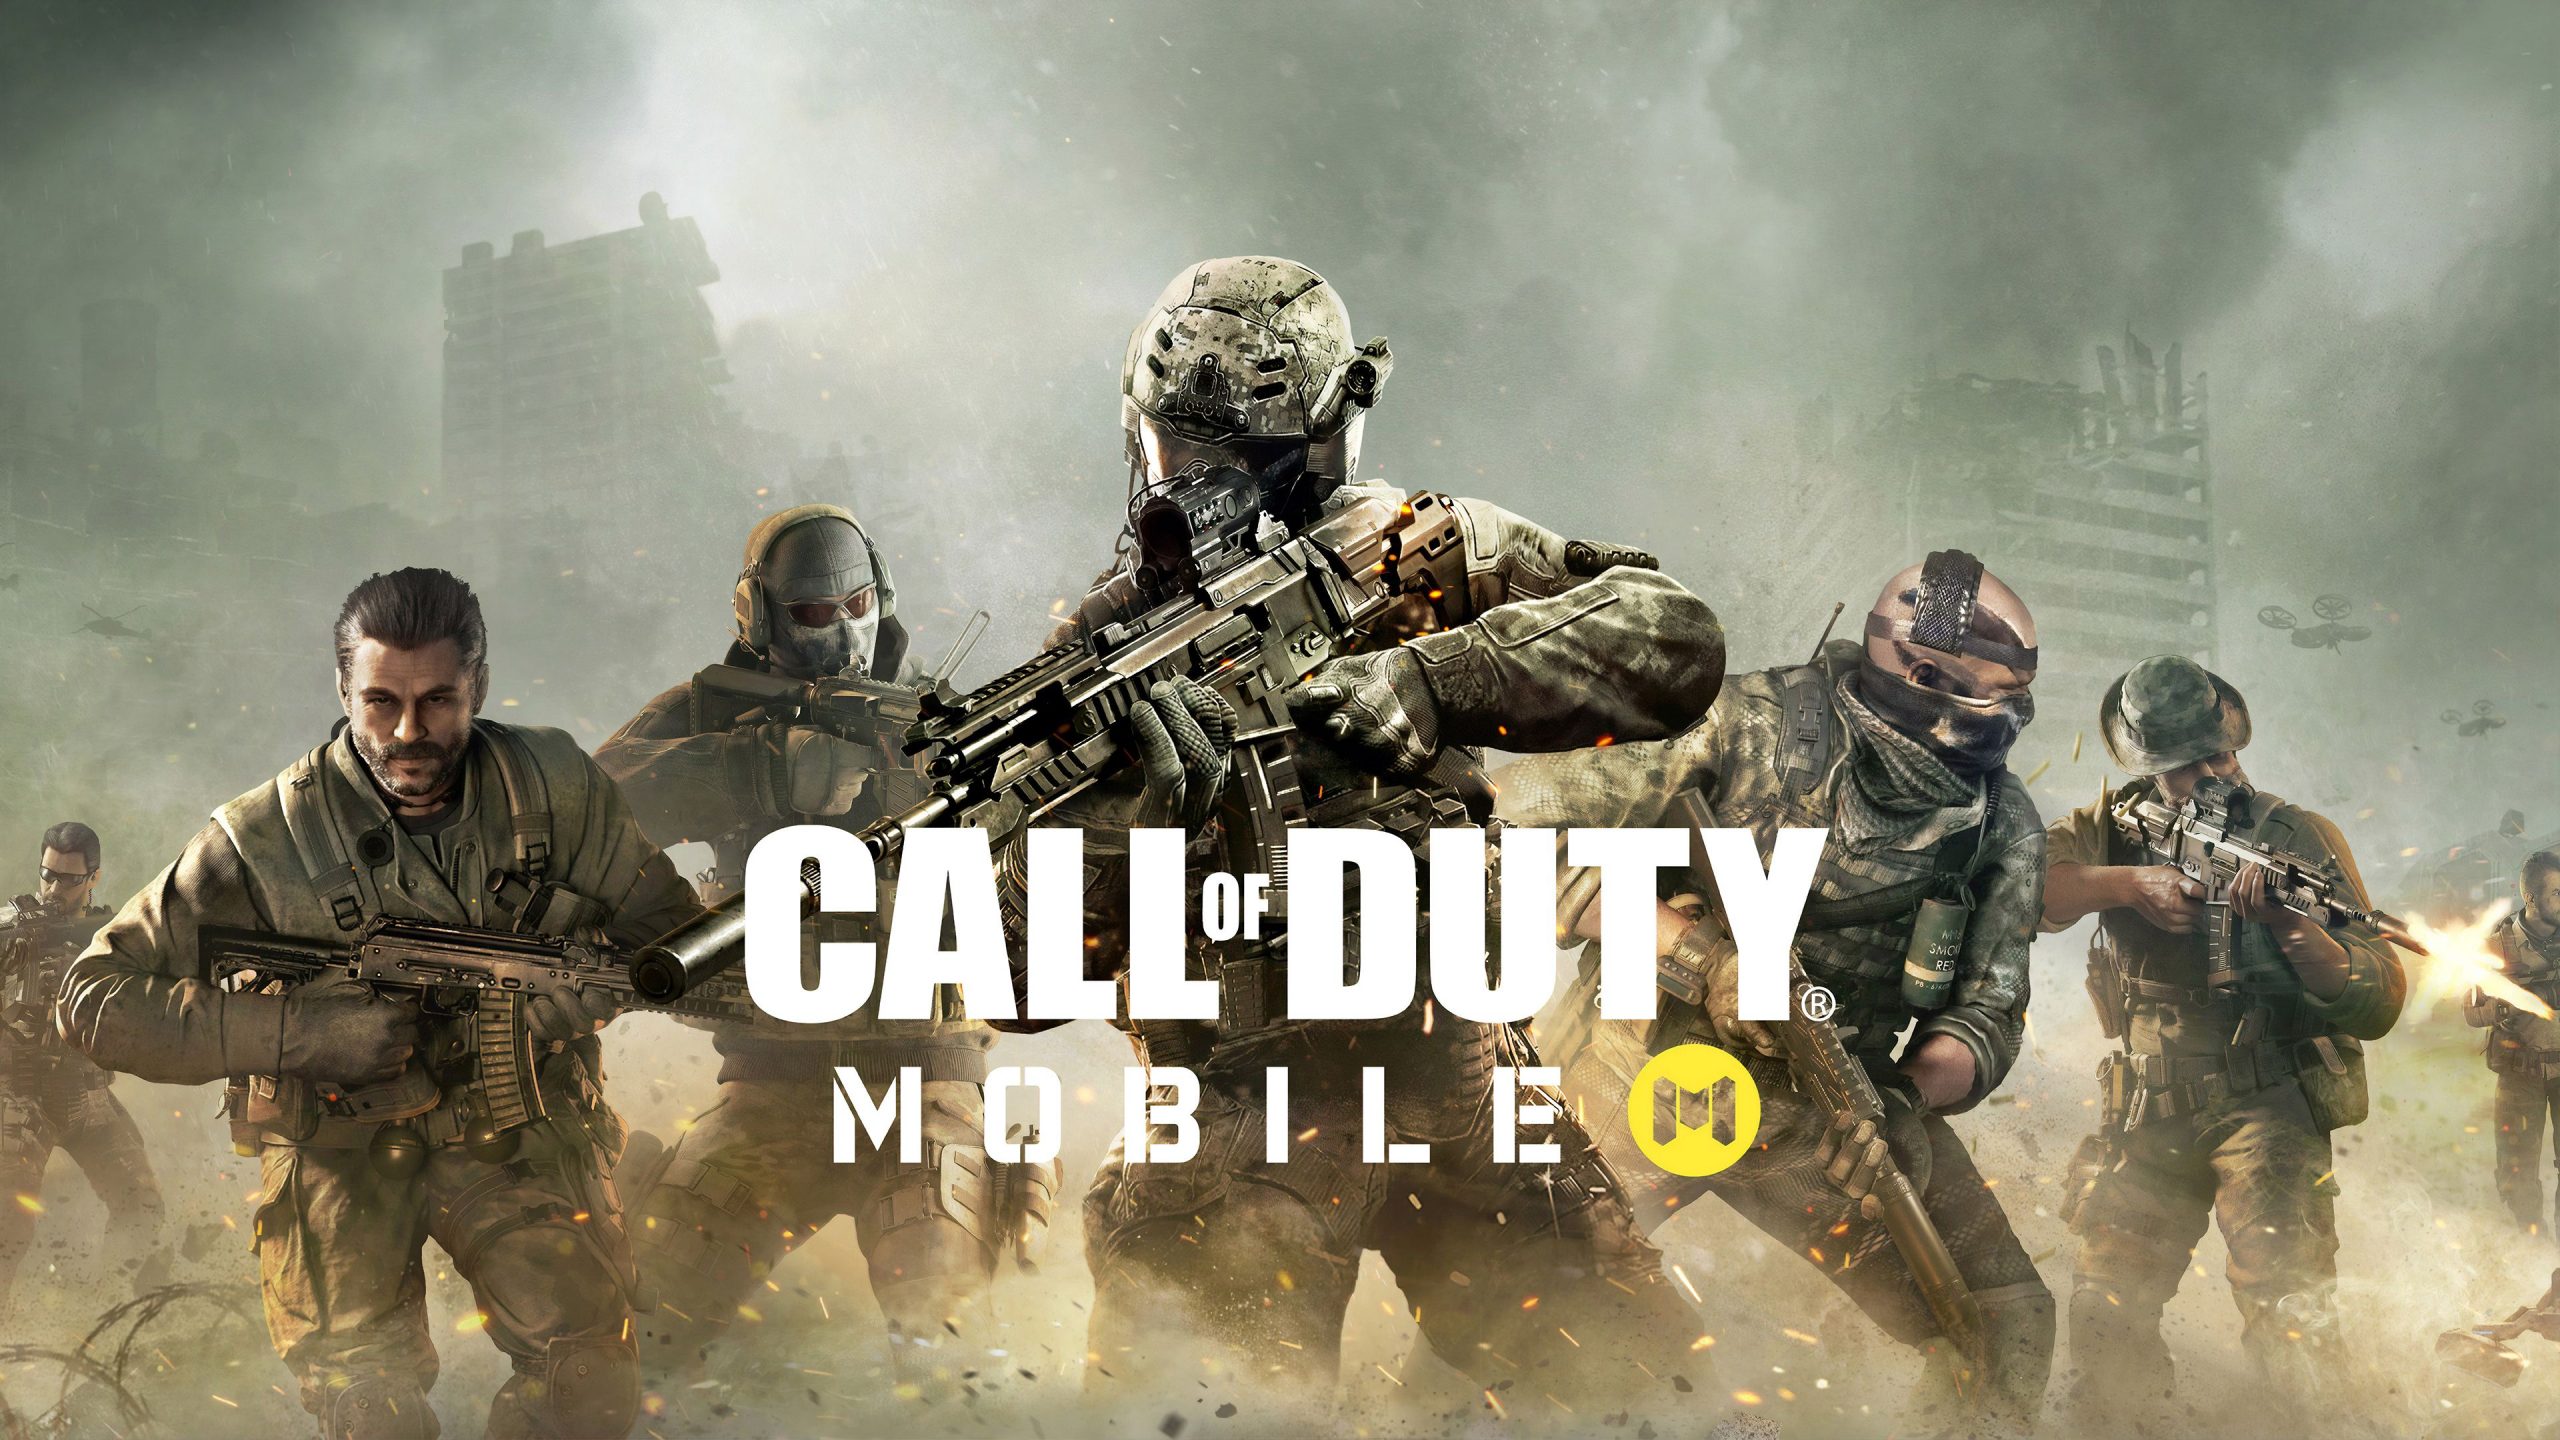 How to Play Call of Duty Mobile With a Controller